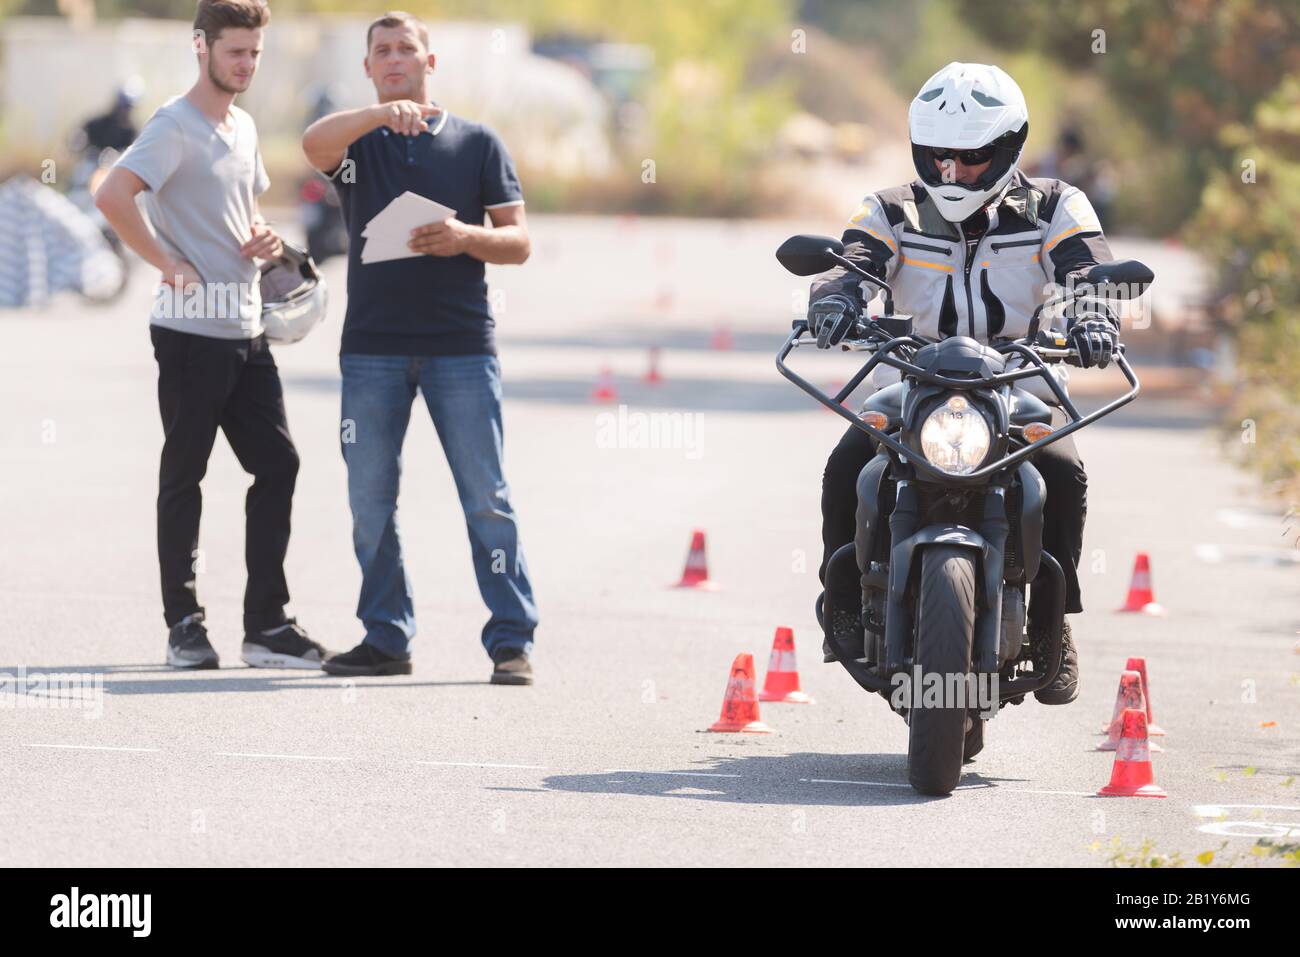 motorcyclist during driving lesson on motordrome Stock Photo